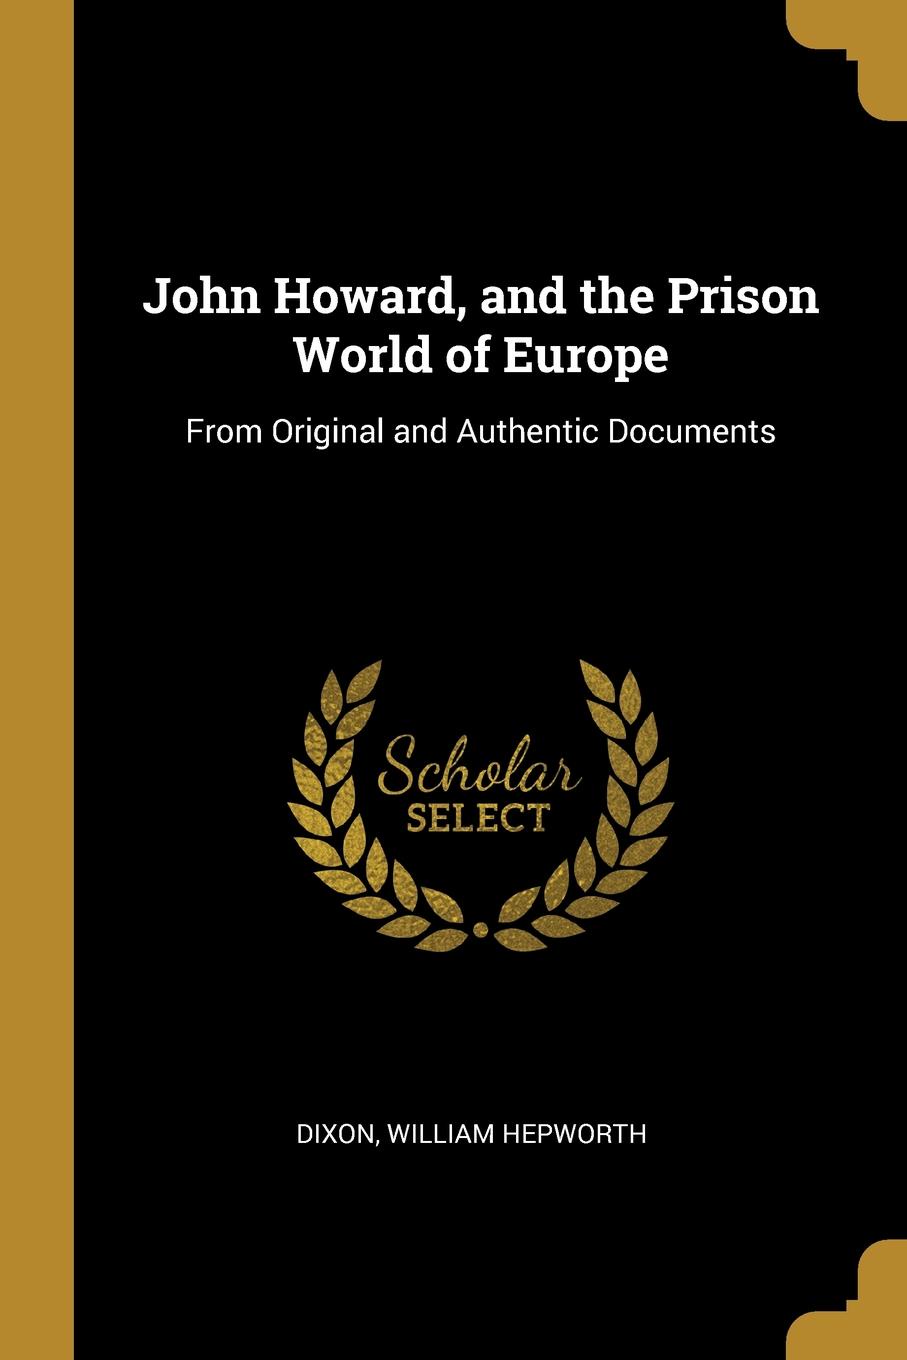 John Howard, and the Prison World of Europe. From Original and Authentic Documents